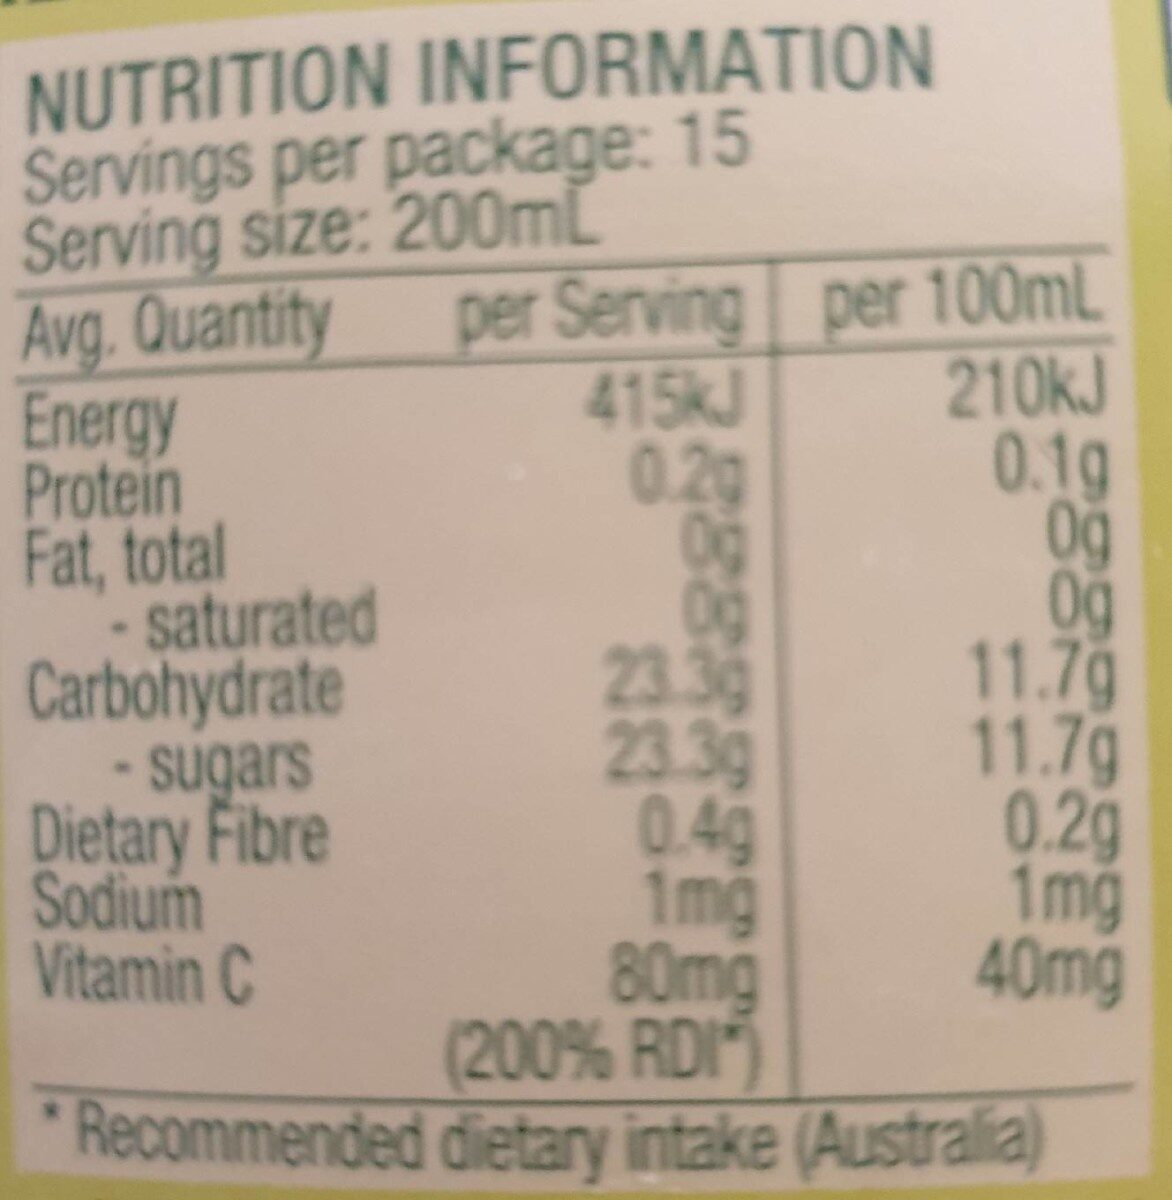 Apple juice serve chilled - Nutrition facts